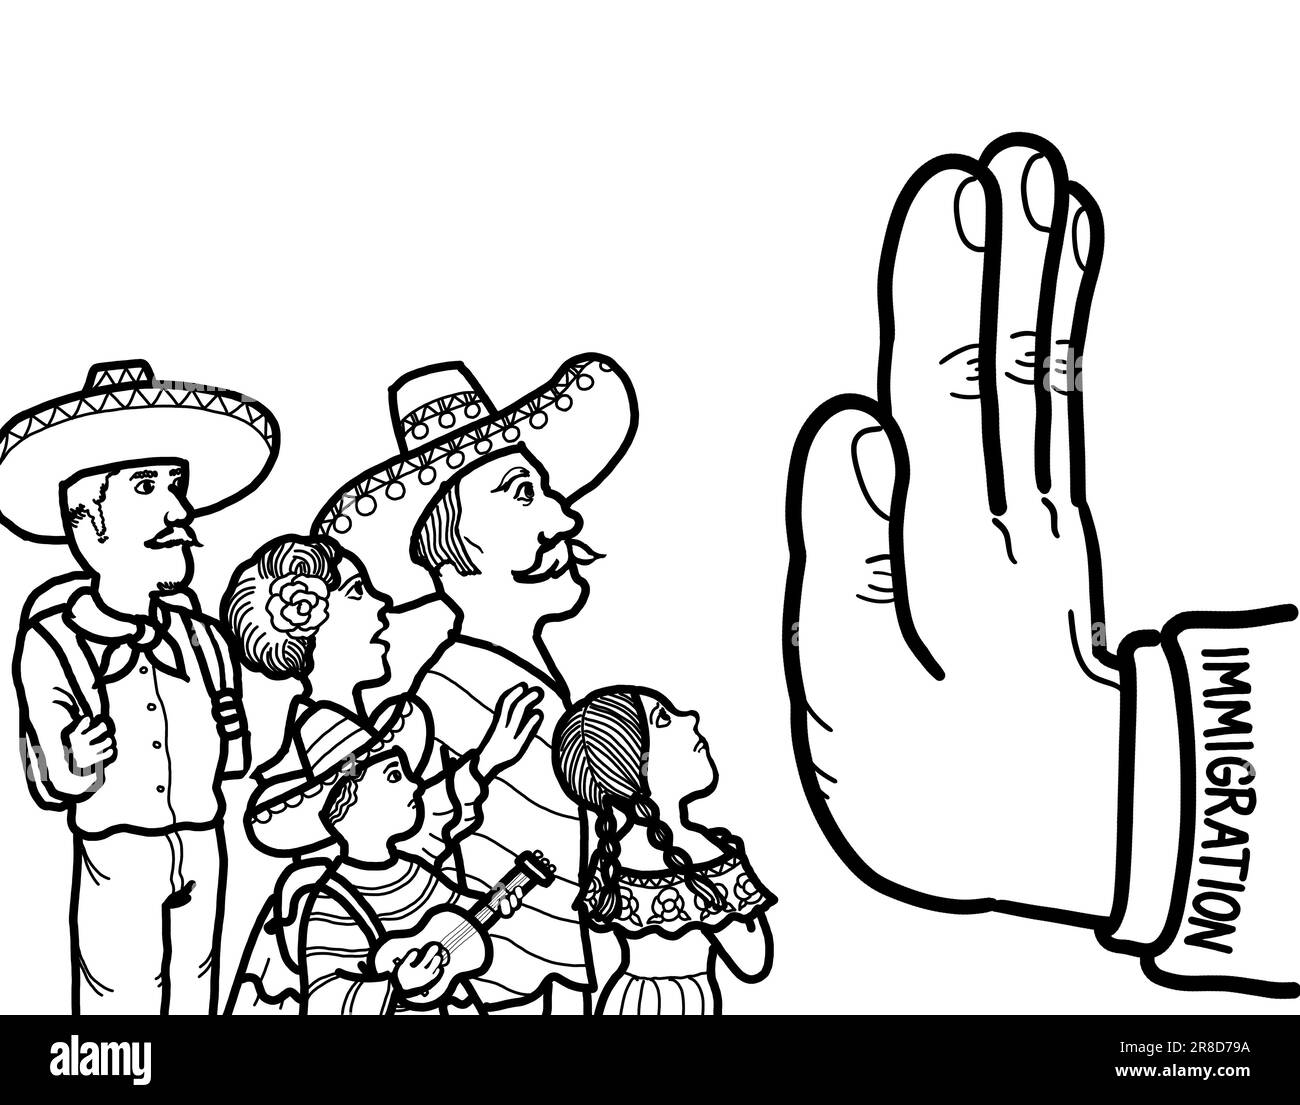 mexican immigrant clipart